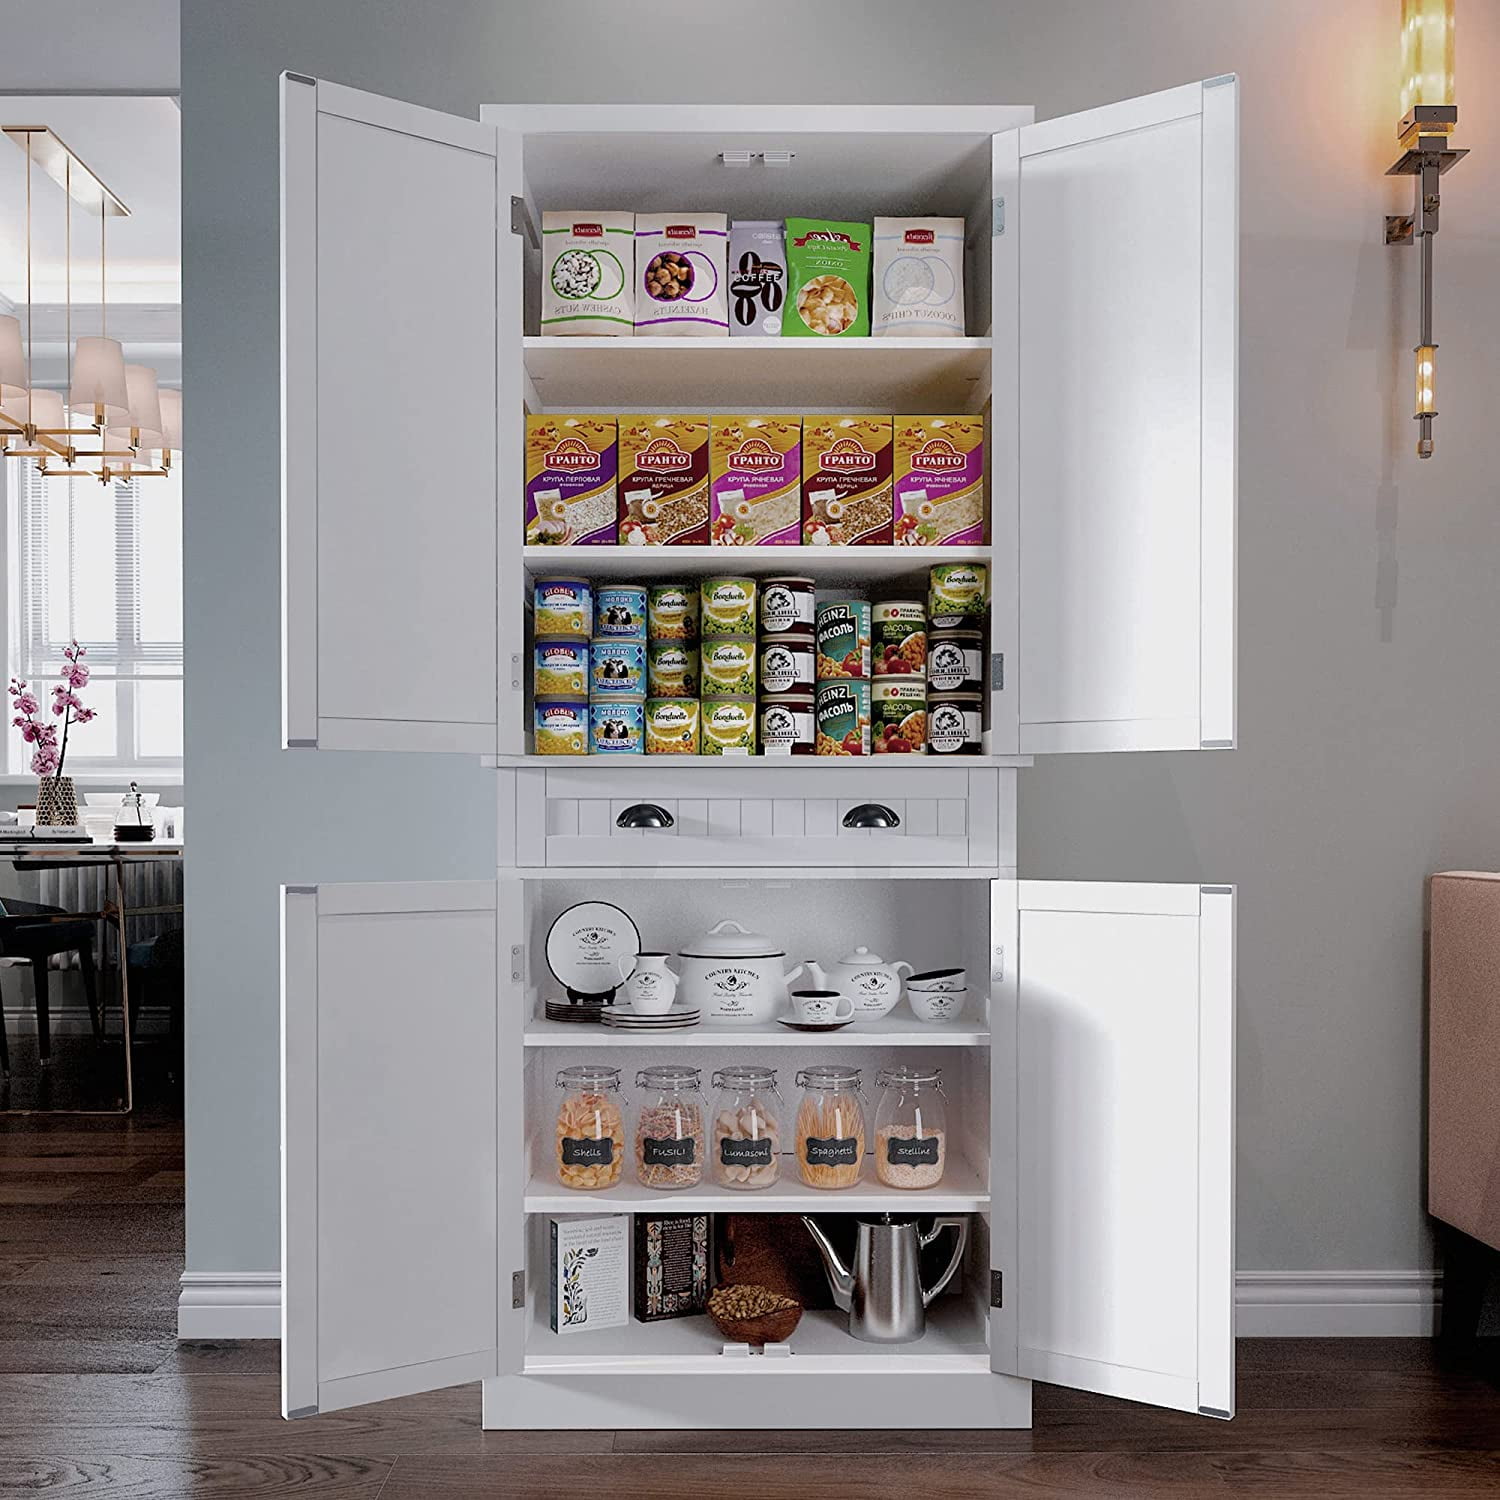  MAXTED Craft Cabinet,Craft Storage Cabinet,Pantry Pantry  Cabinets with Doors and Shelves,Dream Box Craft Storage Cabinet for  Kitchen,Dinning Room,Living Room,Small Place : Home & Kitchen